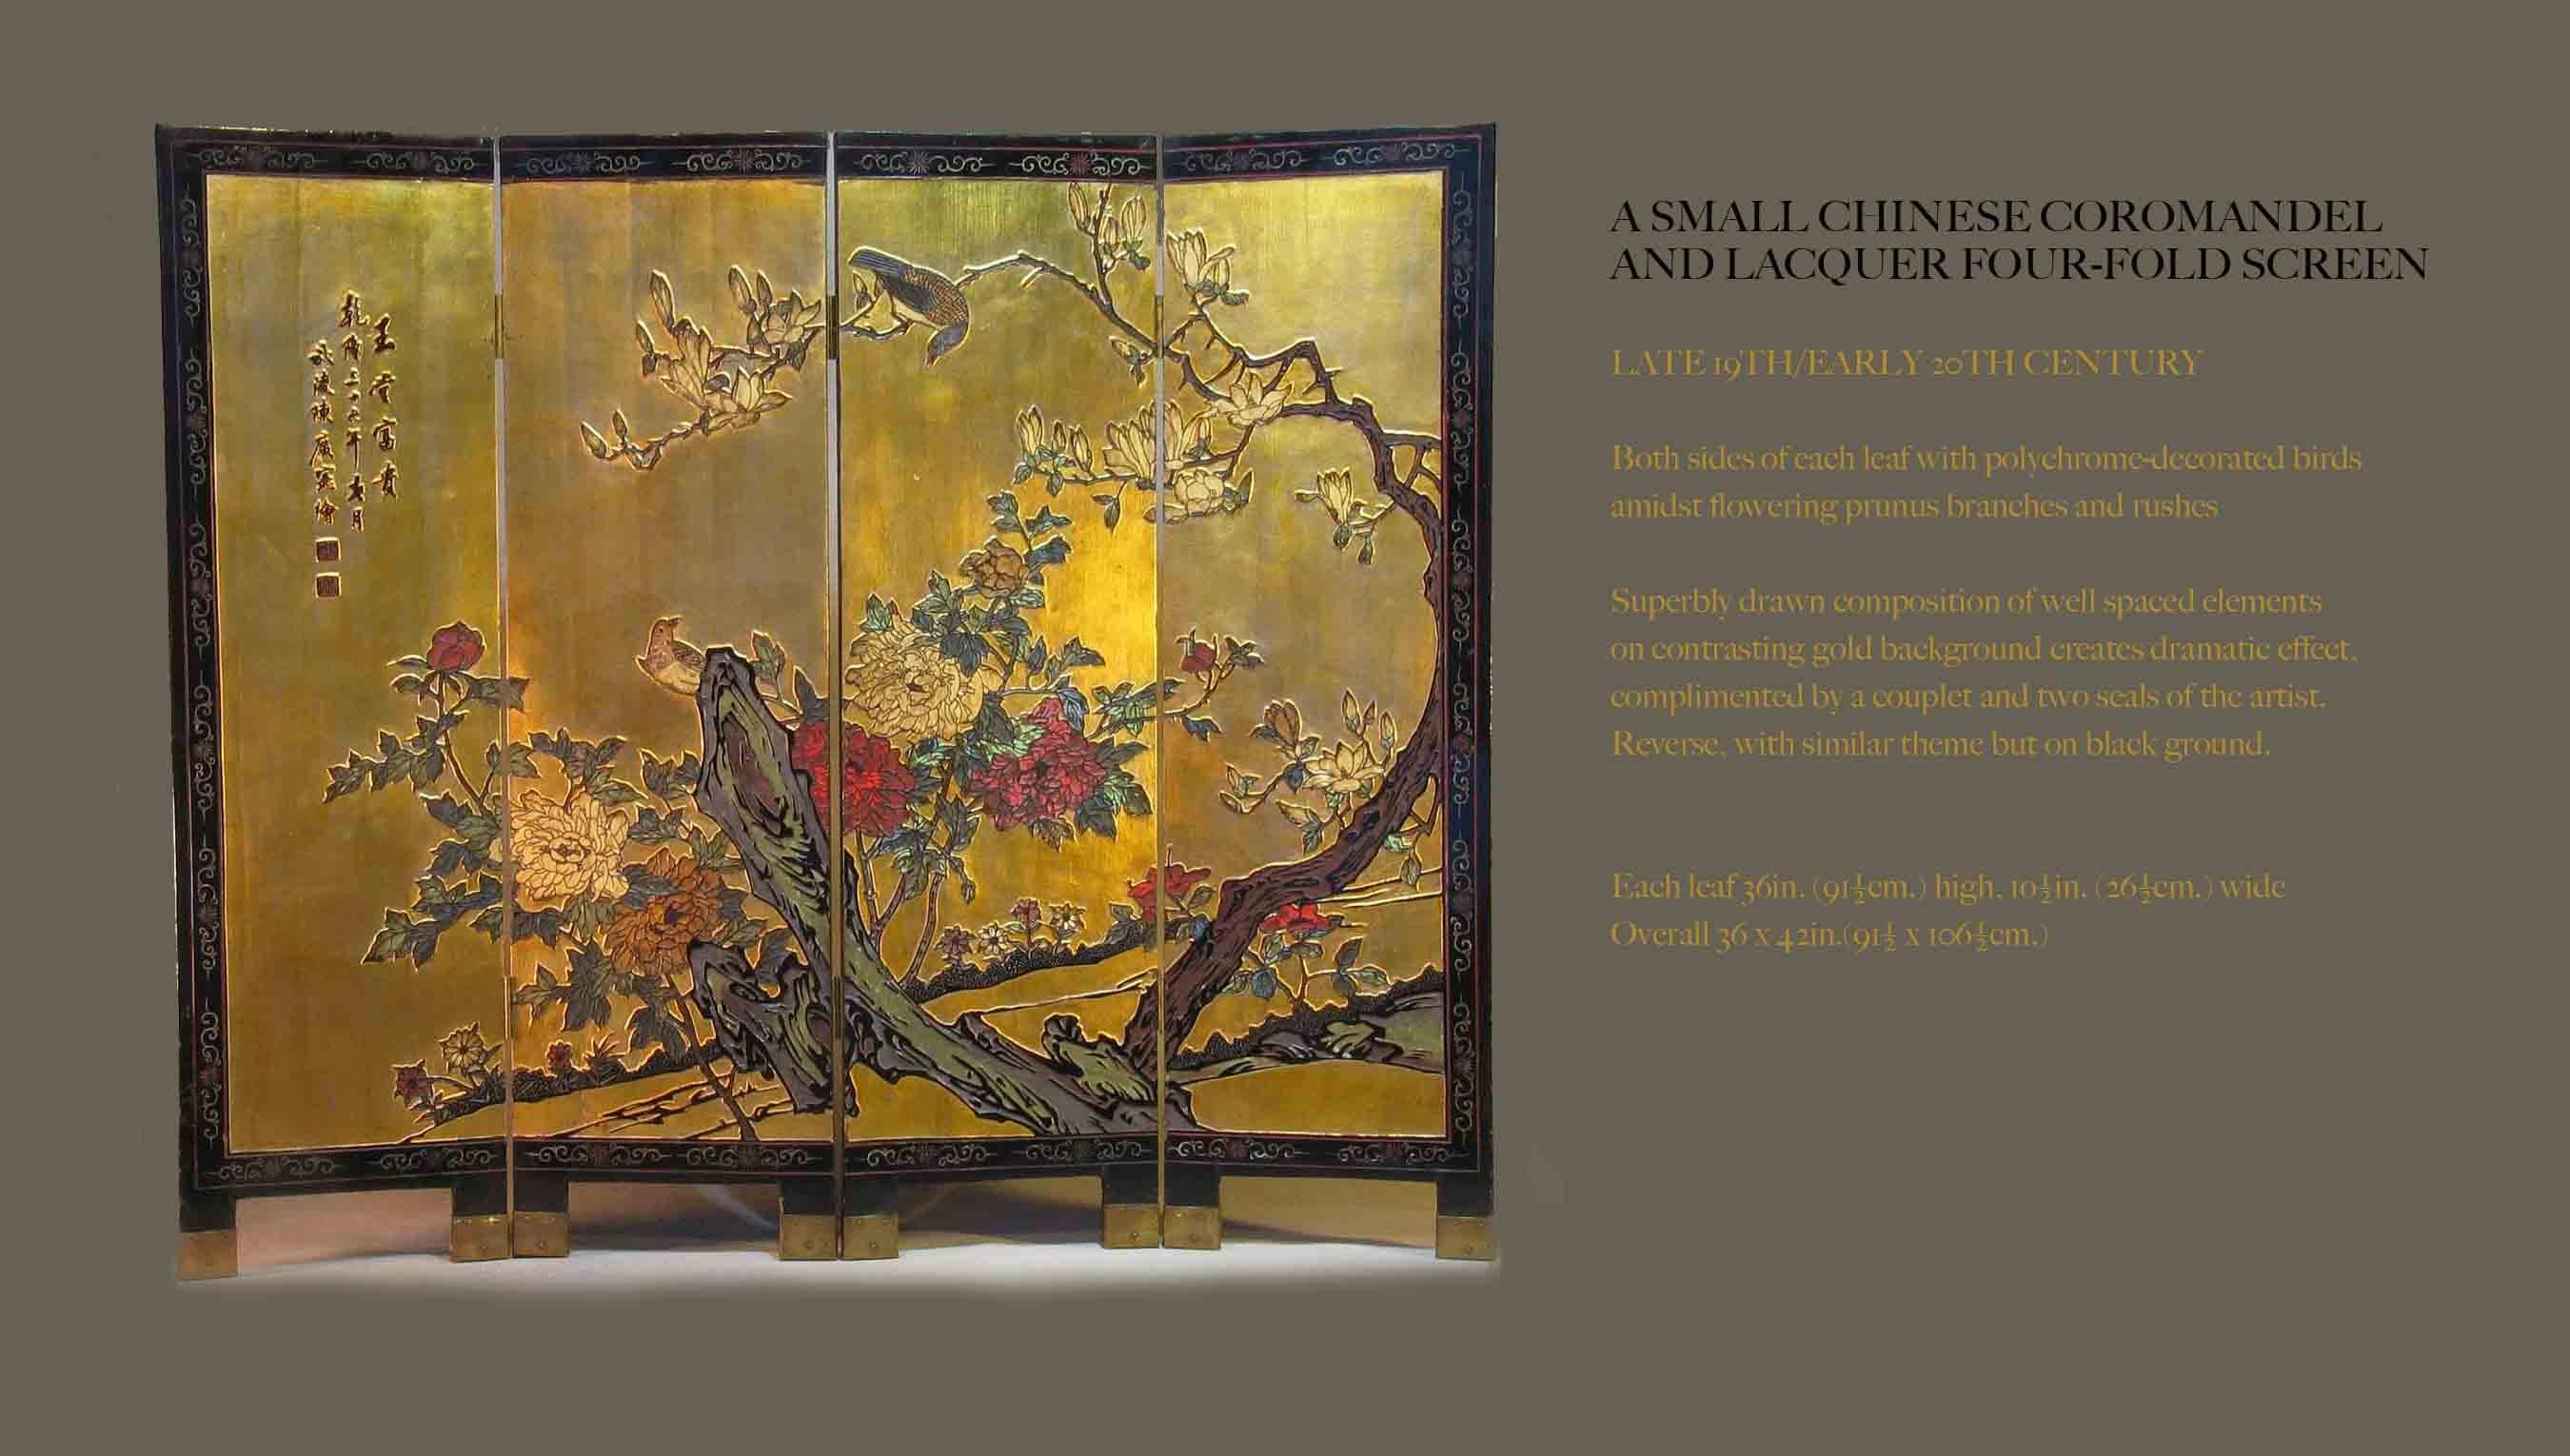 A small diminutive Chinese Coromandel and lacquer four fold screen, mid-20th century. Both sides of each leaf with polychrome decorated birds amidst flowering prunus branches and rushes.
Superbly drawn composition of well spaced elements on